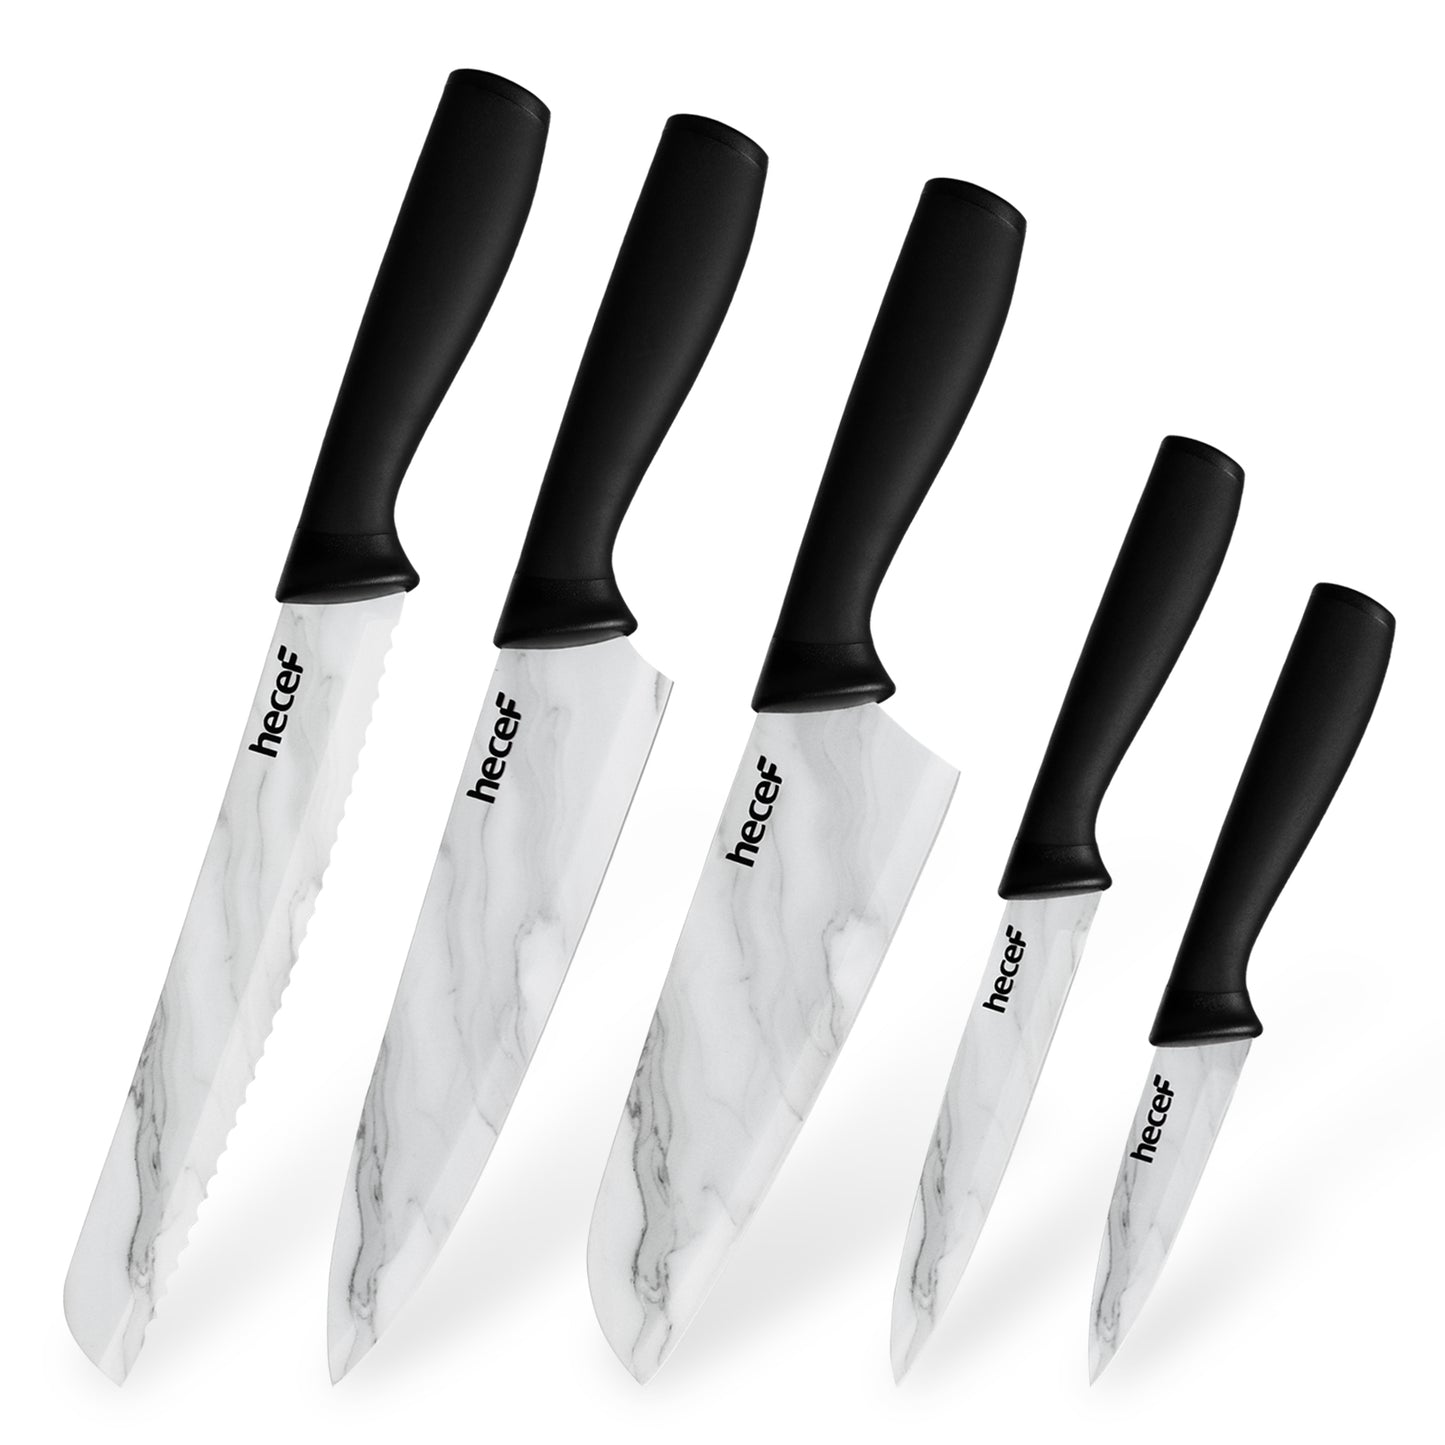 Kitchen Knife Set with Marble Pattern, Non-stick Ceramic Coated Stainless Steel Blades with Protective Sheaths, Professional Chef Knife Set for Kitchen, Restaurant, Camping - Hecef Kitchen